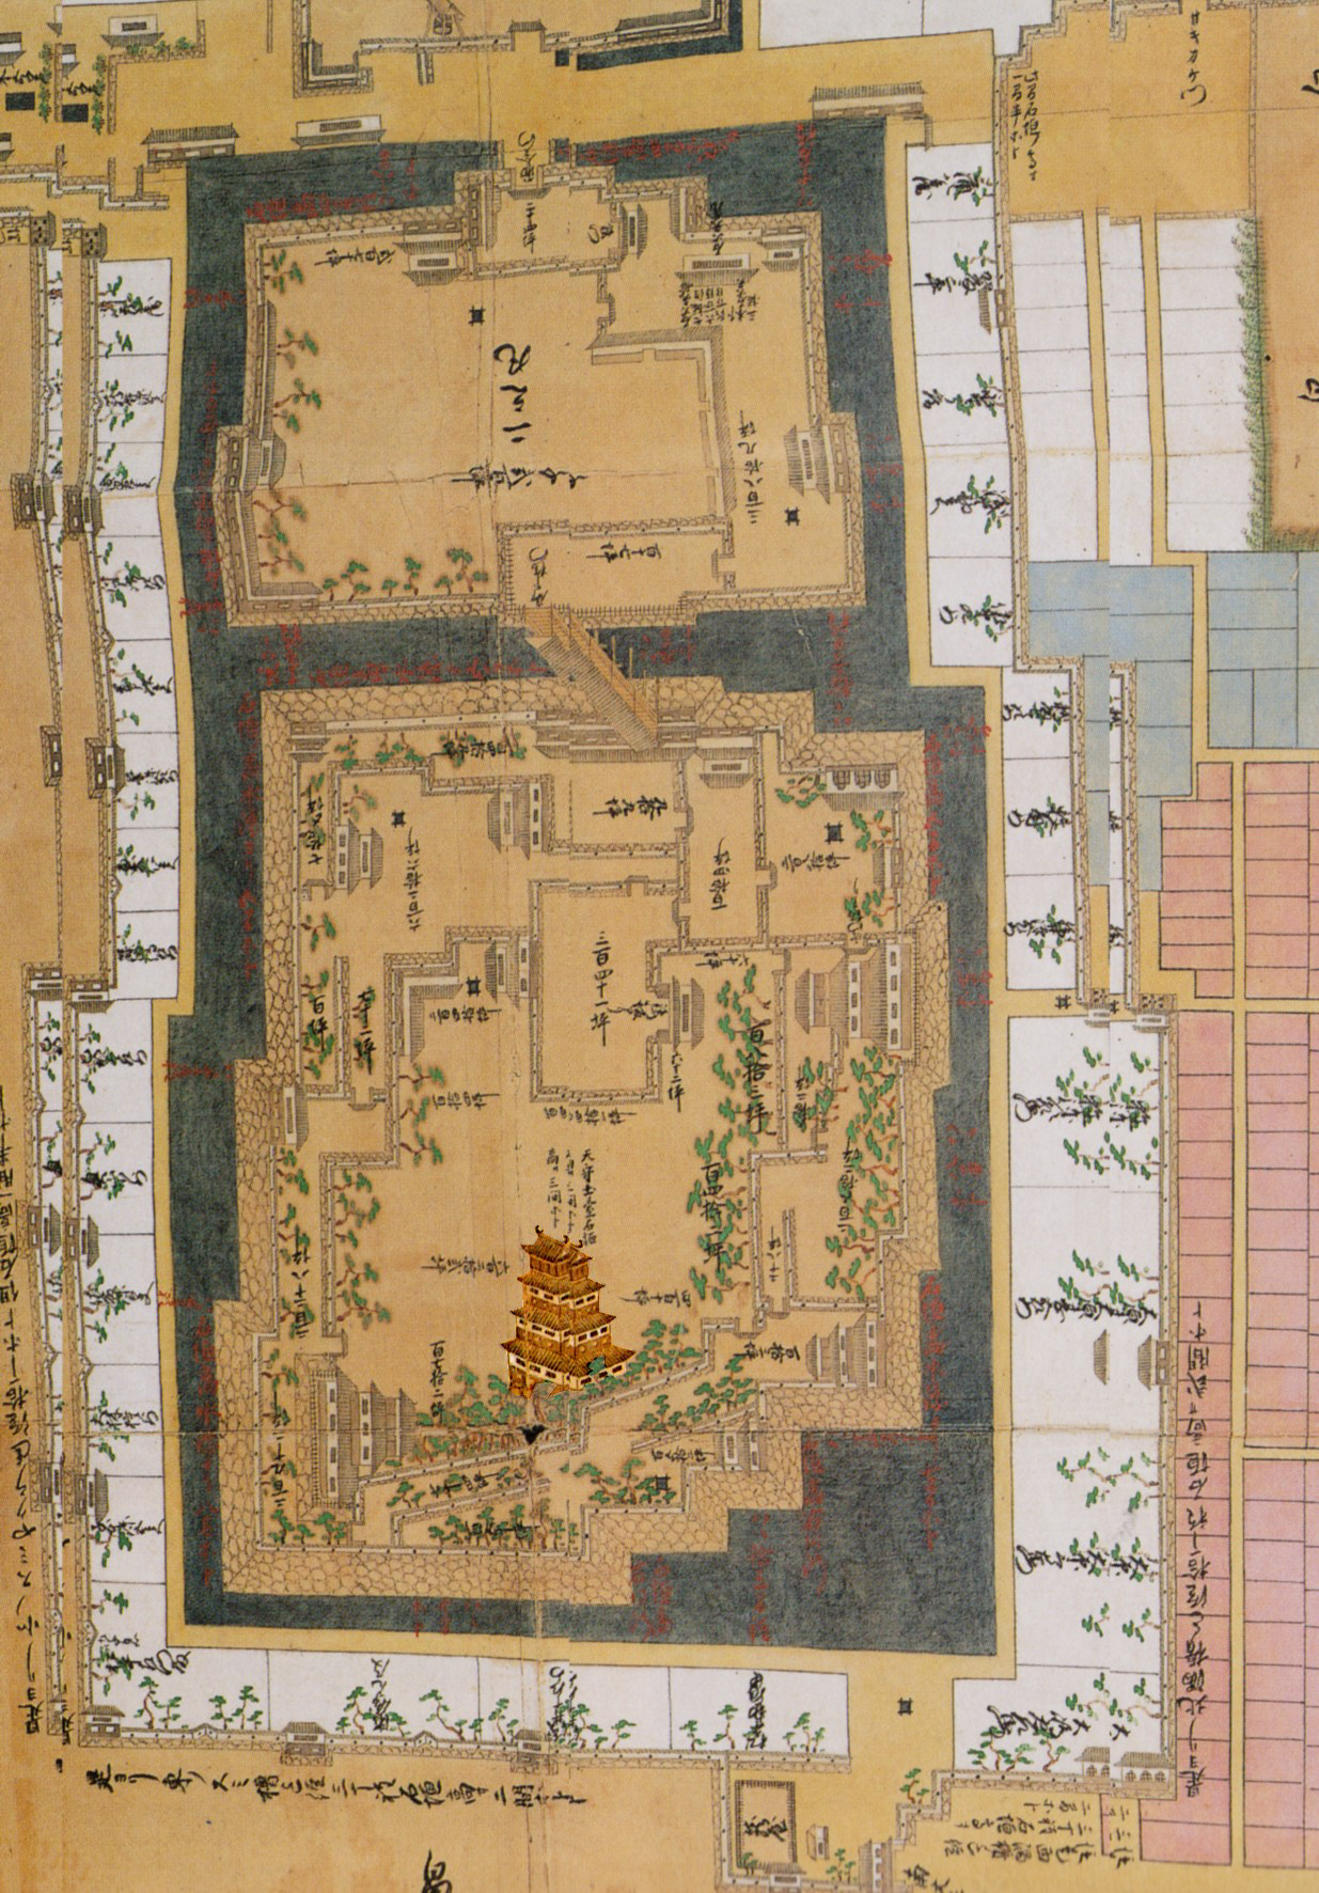 Hara Castle,  site of the Shimabara Rebellion by Japanese Christians, c.1800.